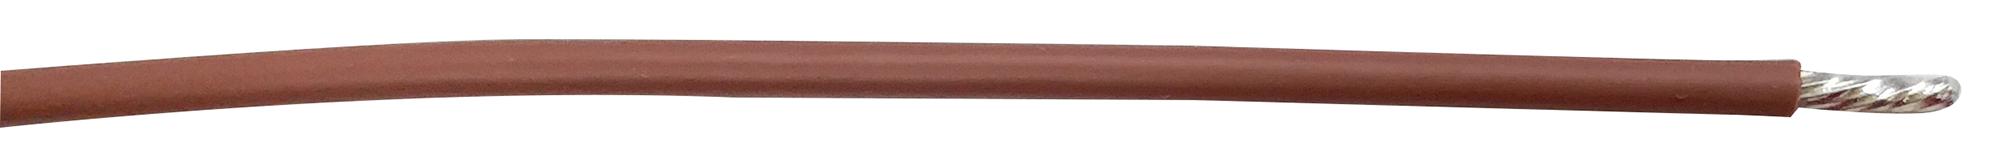 PP002517 CABLE WIRE, 16AWG, BROWN, 305M PRO POWER